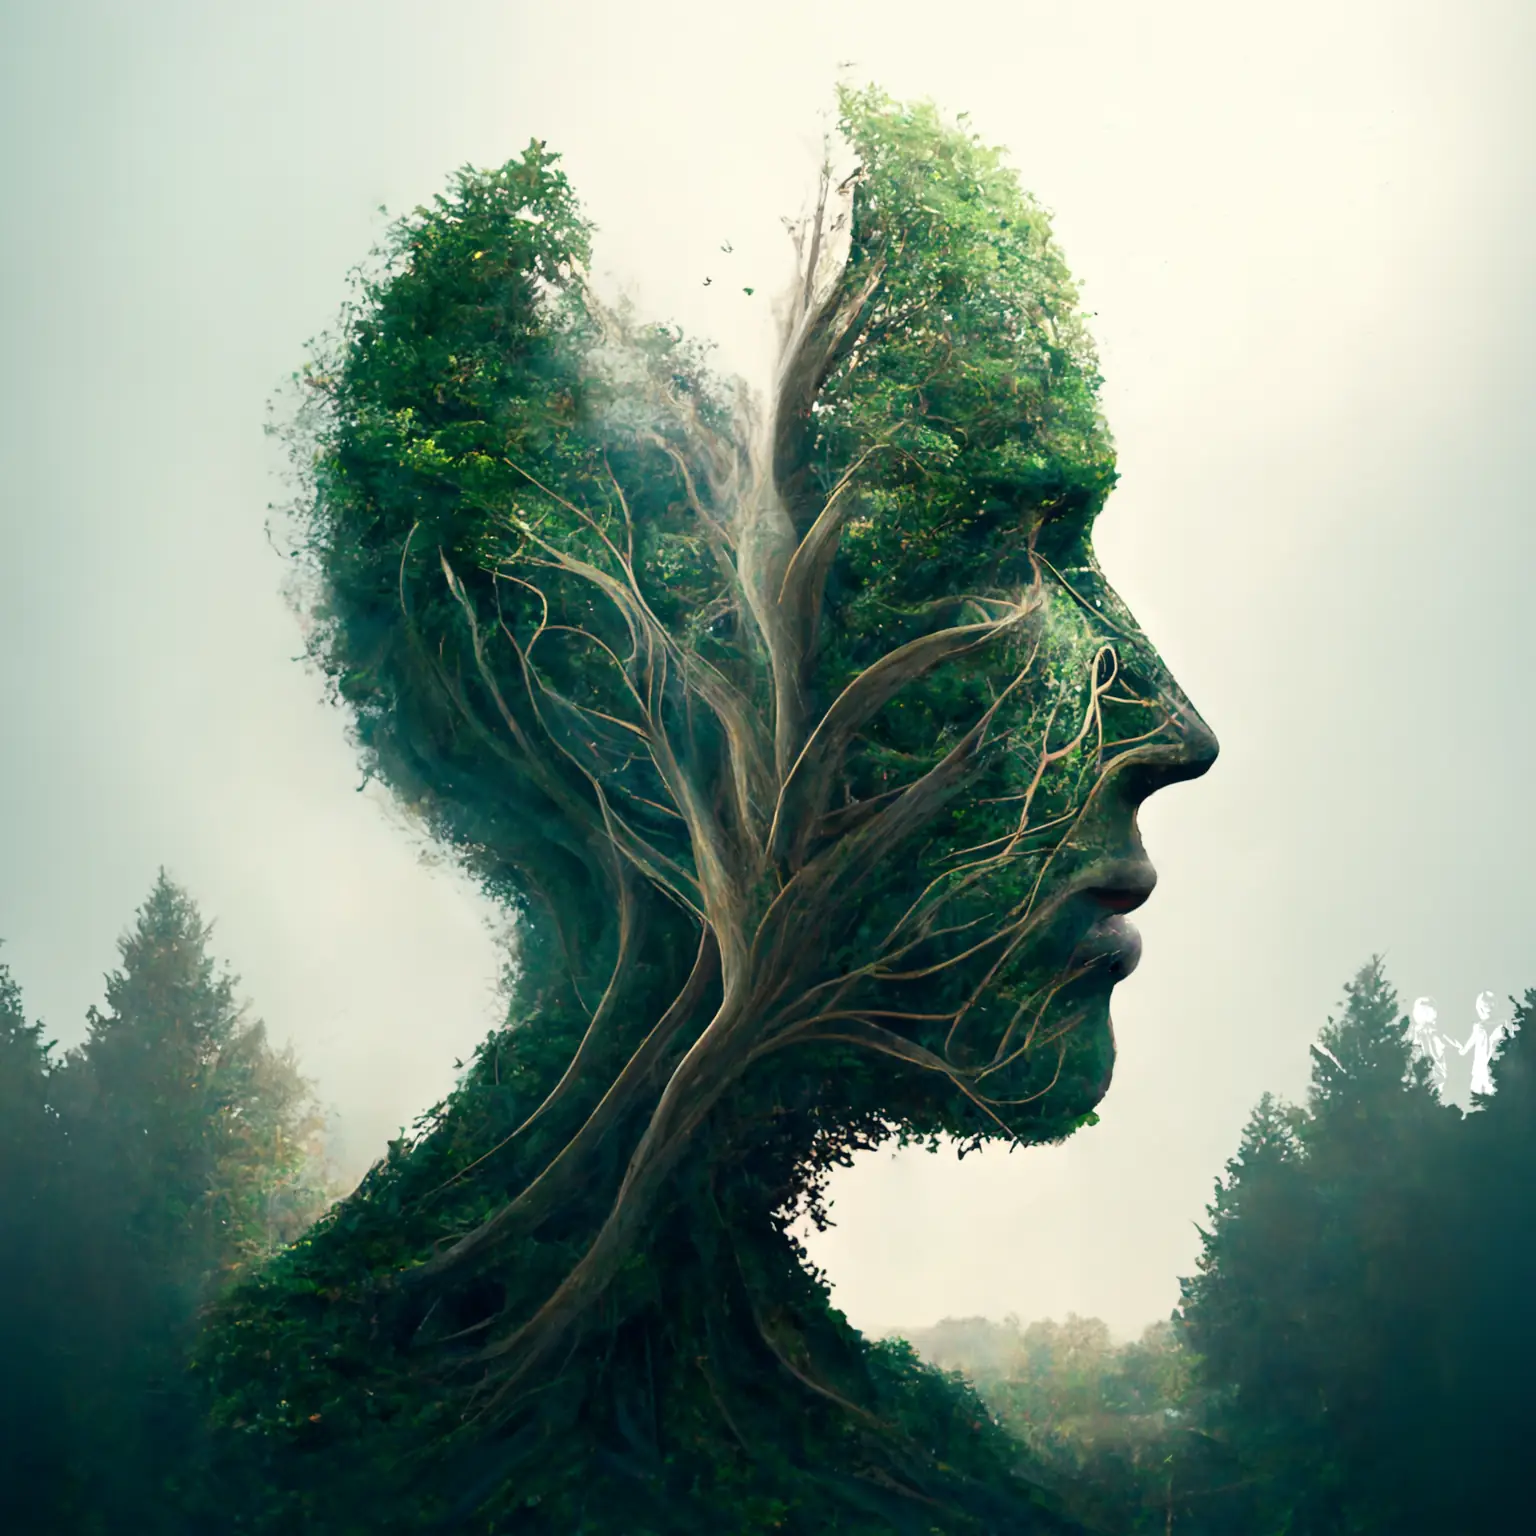 A side view of a person's head, the head has morphed into a tree which has an opening at the top. Branches run throughout like veins. The eyes are closed and the person look contemplative and content.